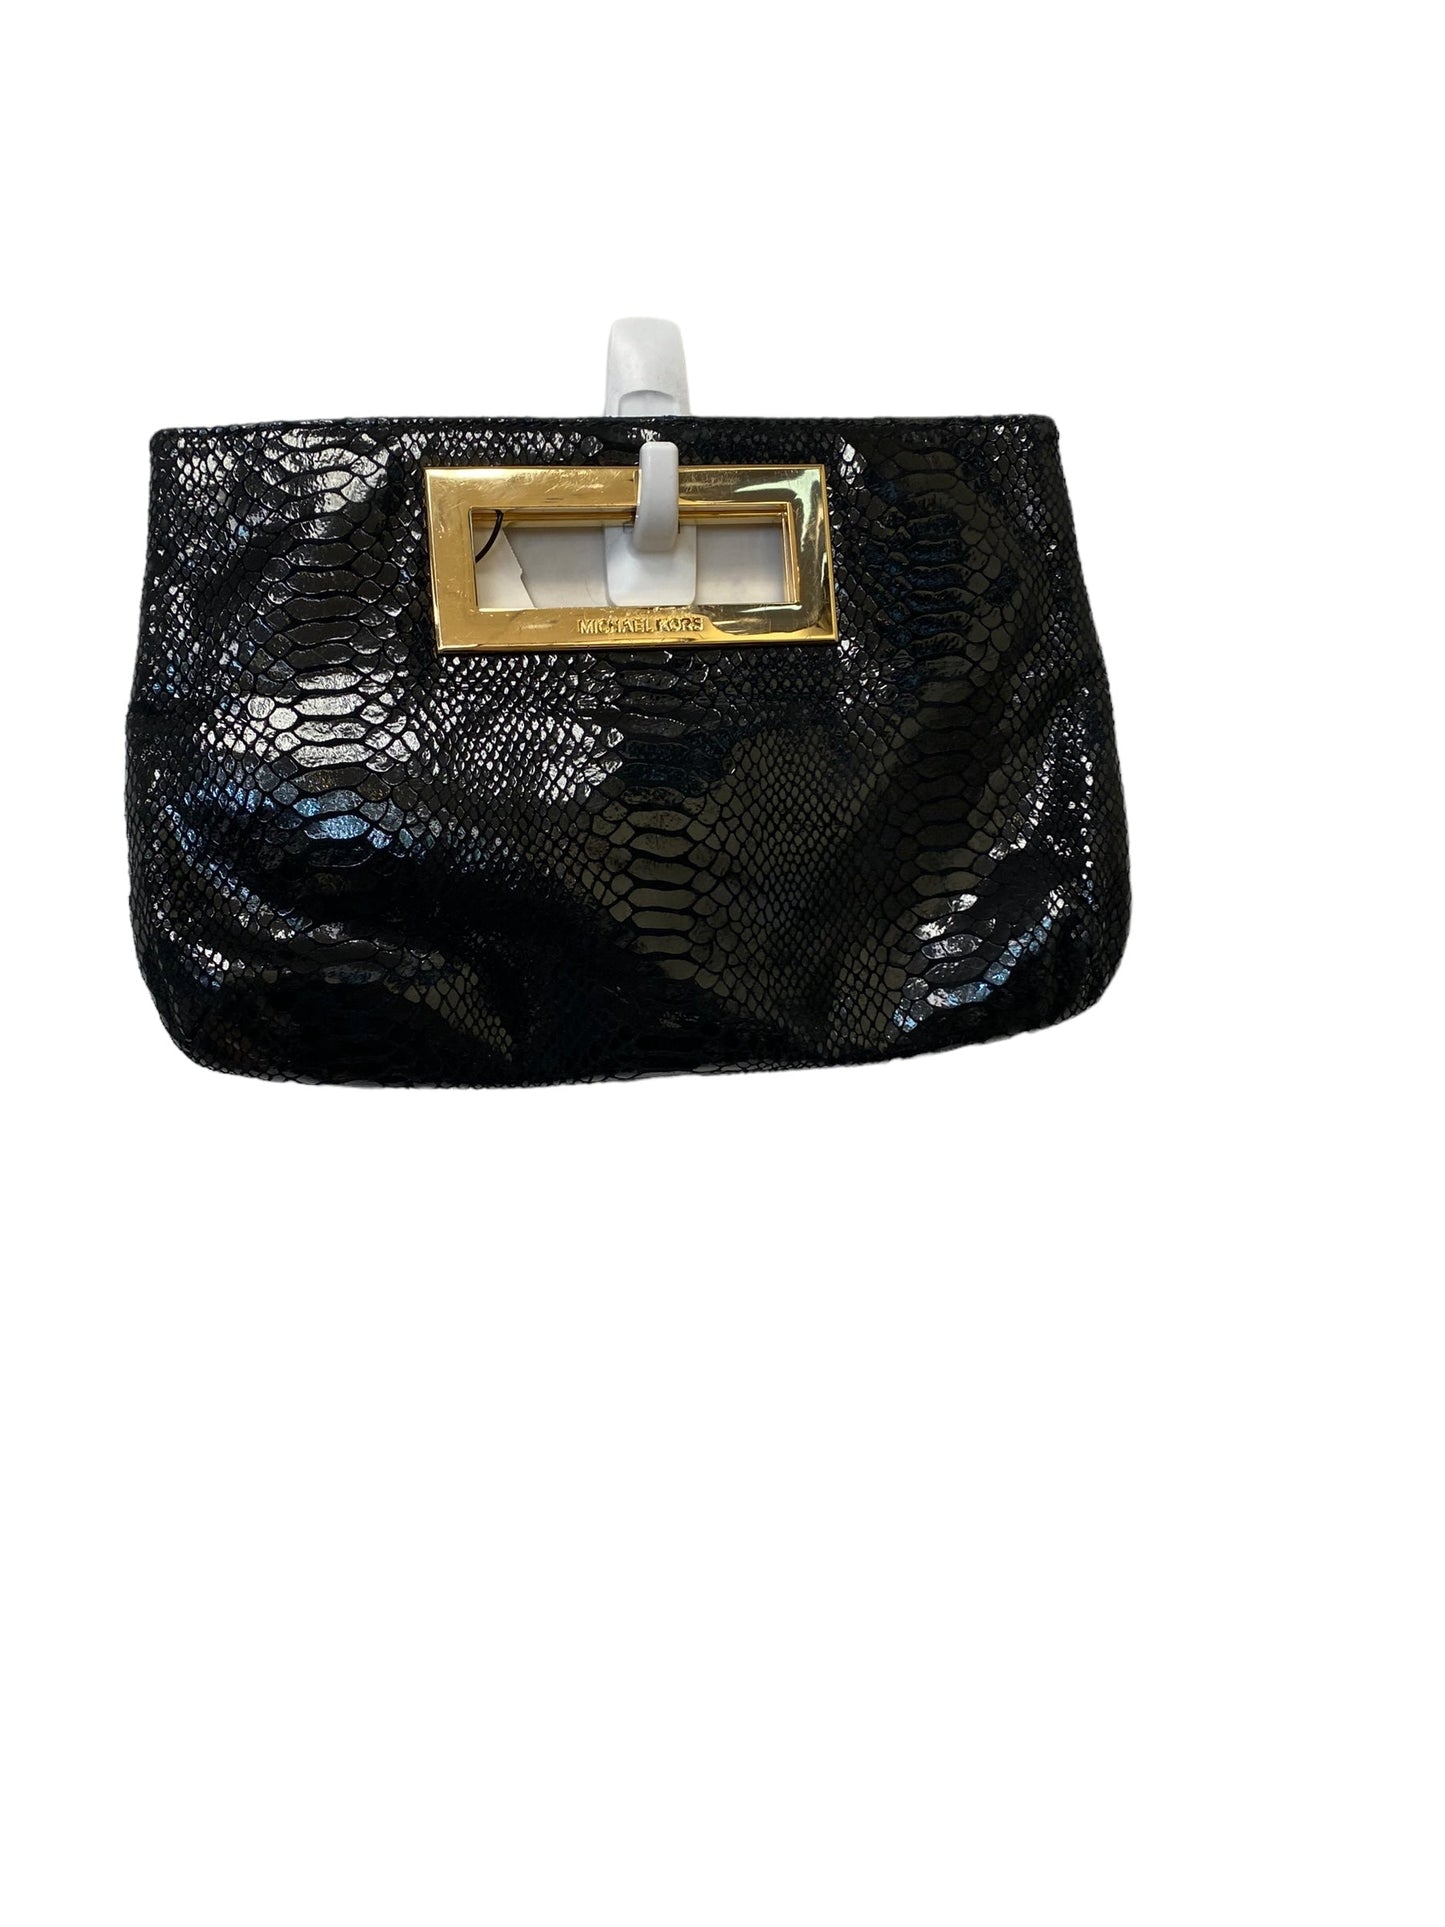 Clutch By Michael Kors  Size: Small